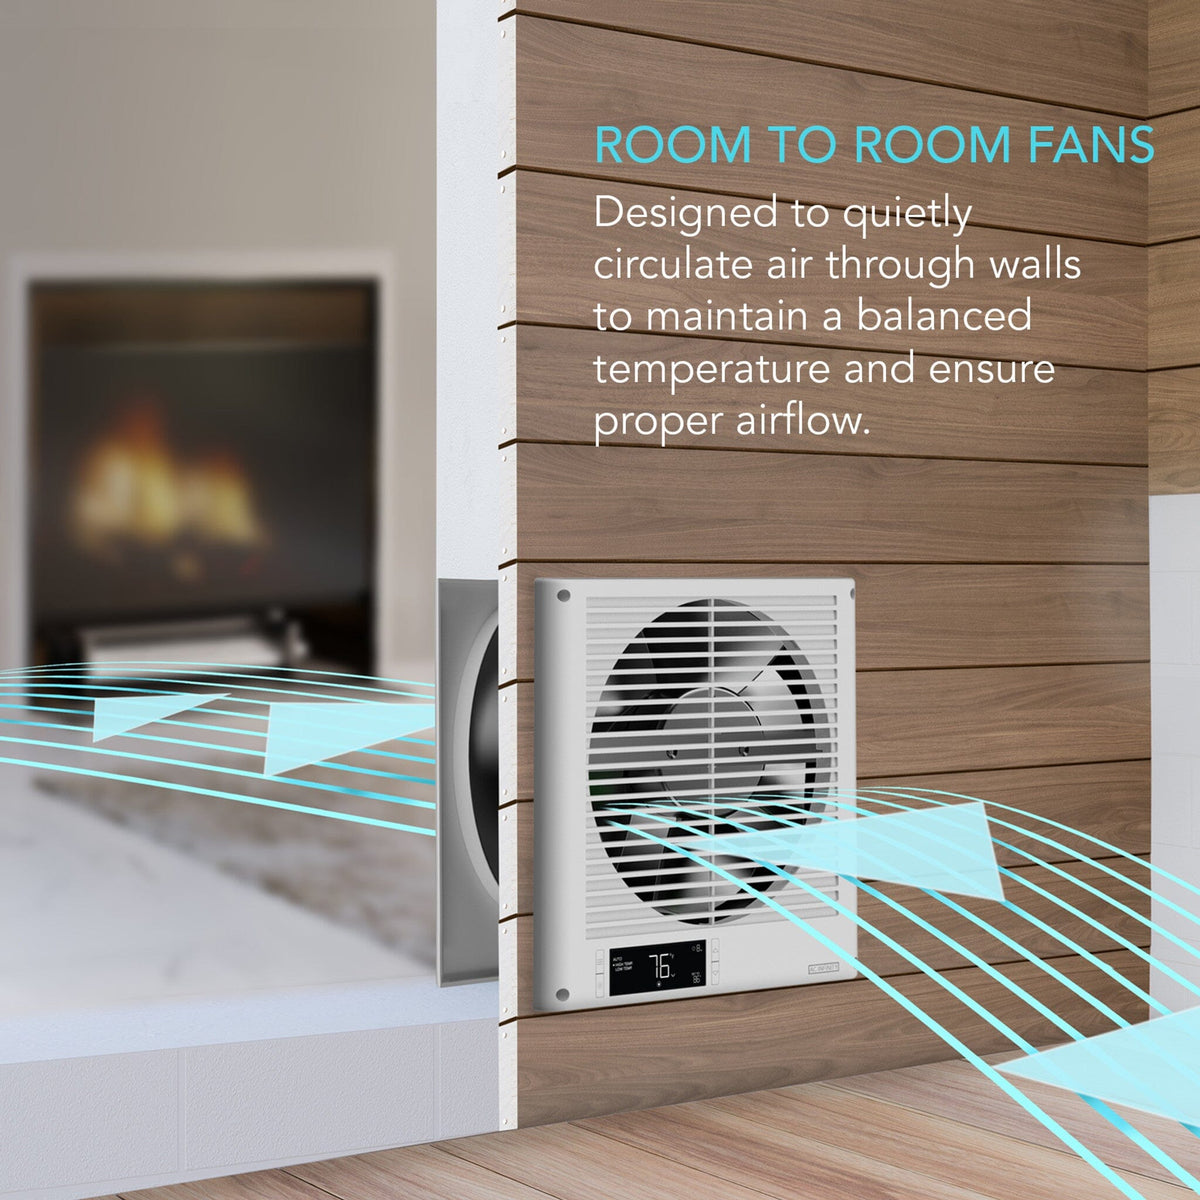 Room to room fans by AC Infinity